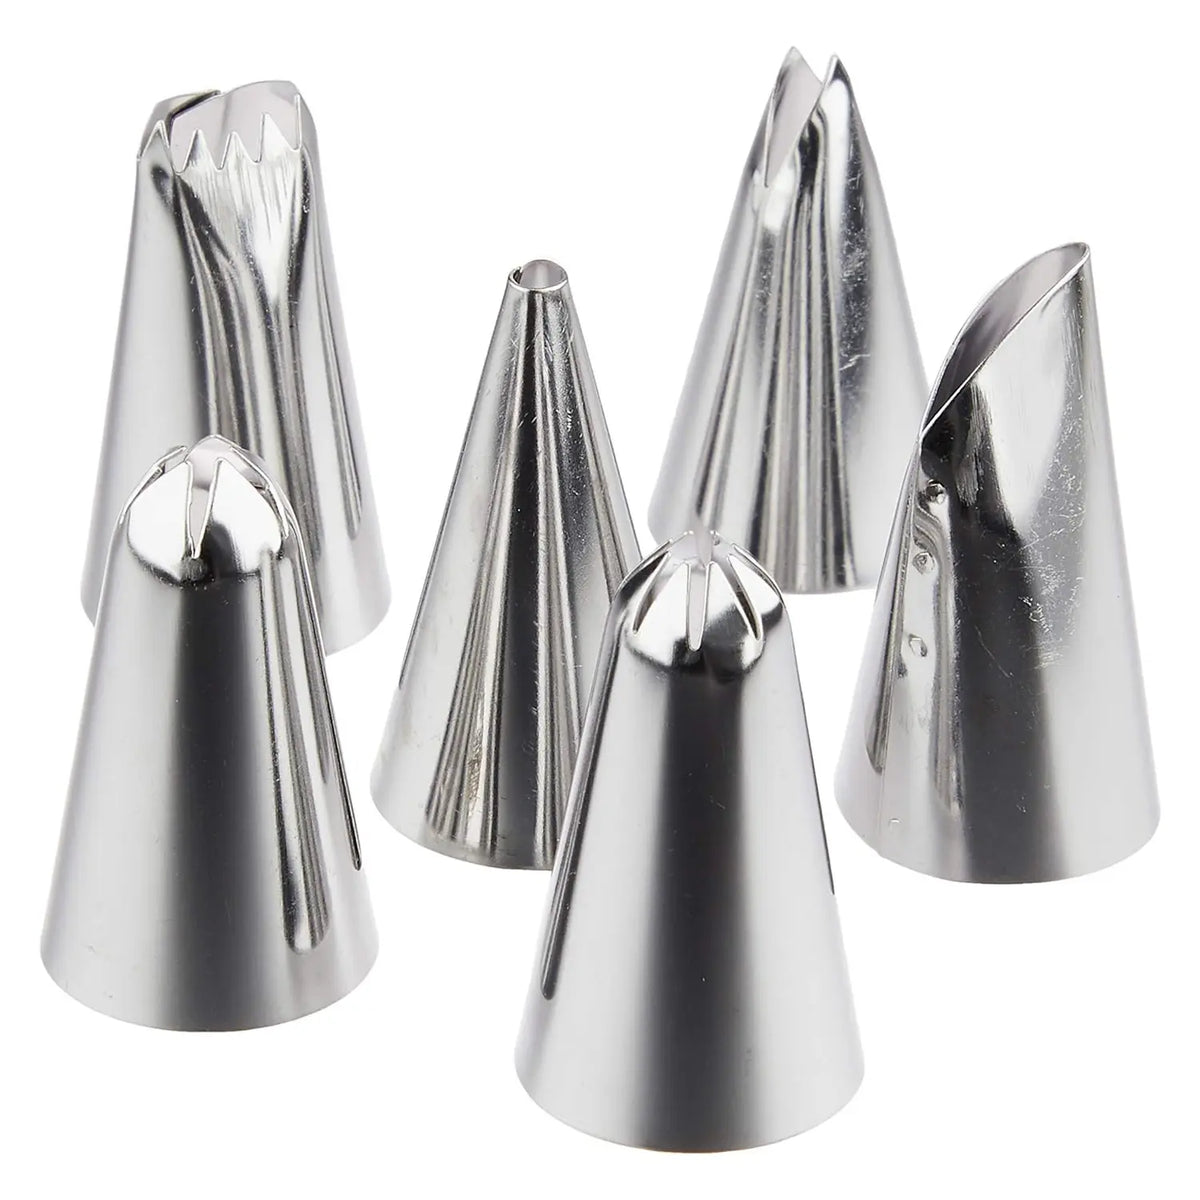 Shimotori Queen Rose Stainless Steel Piping Tips 6 pcs